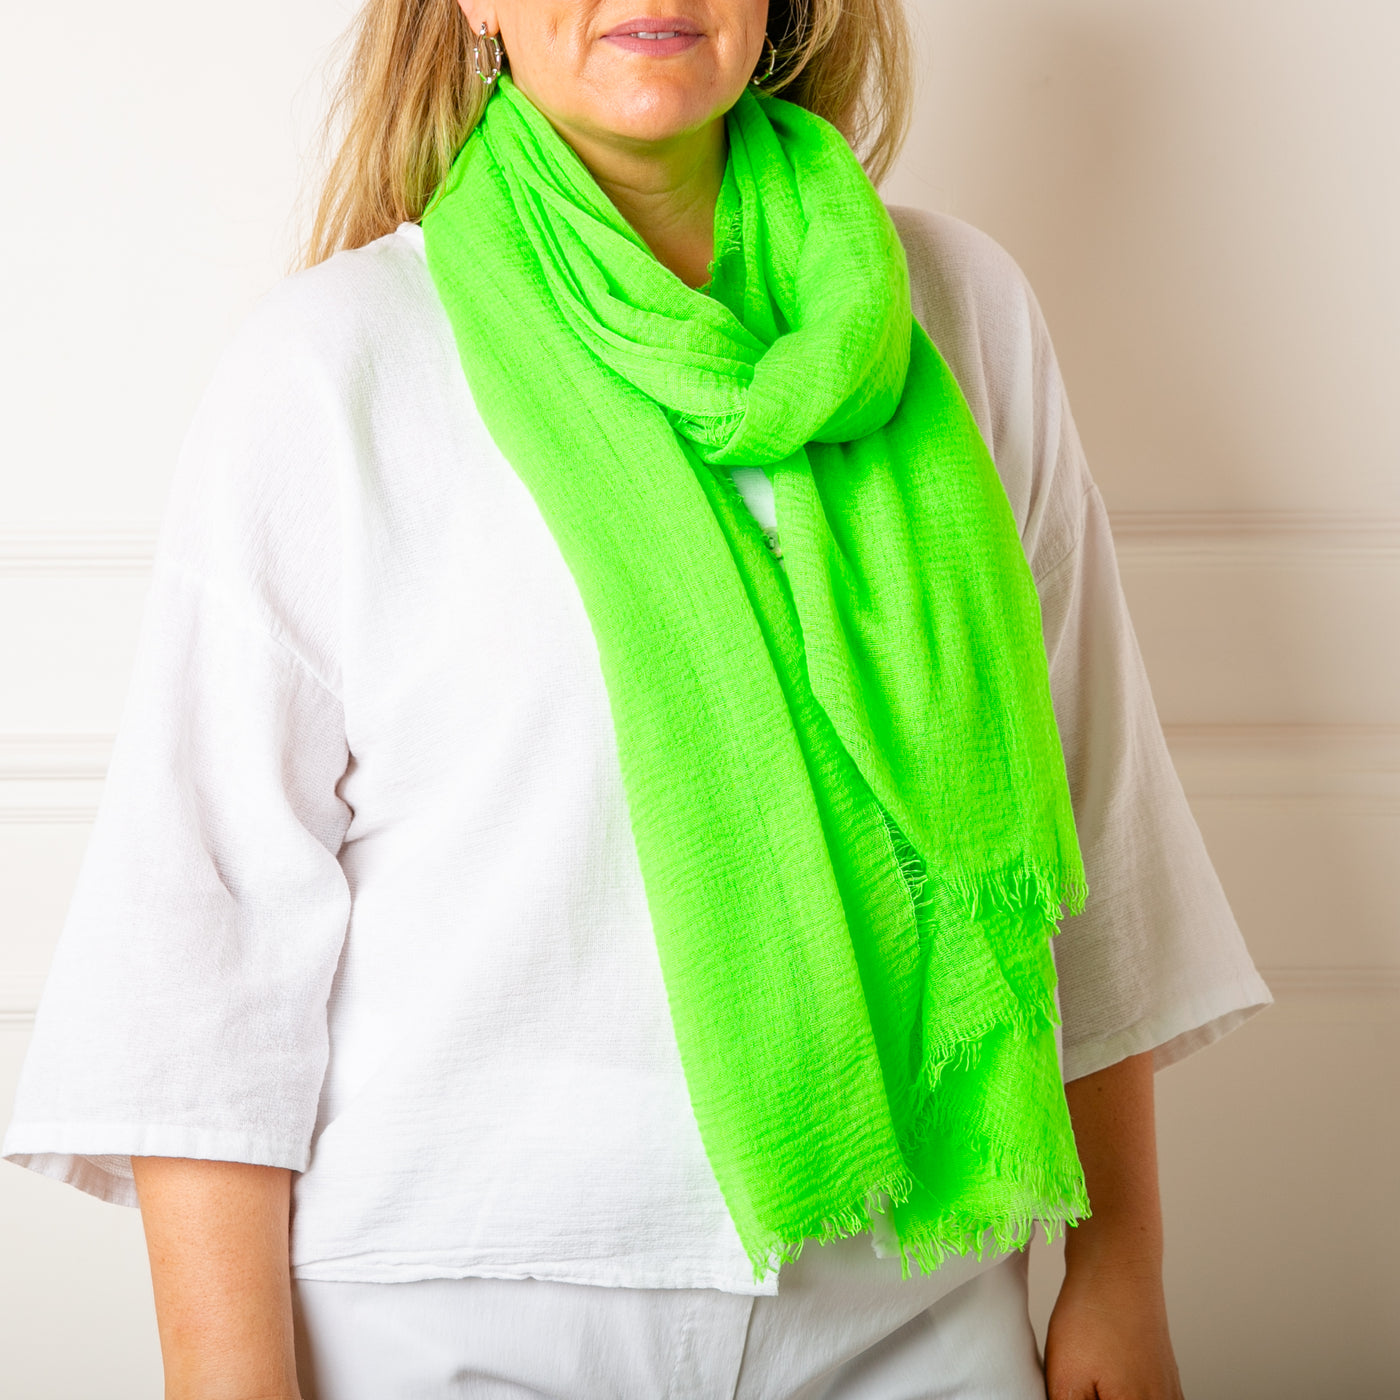 The lime green Plain Summer Scarf made from a soft, lightweight viscose material